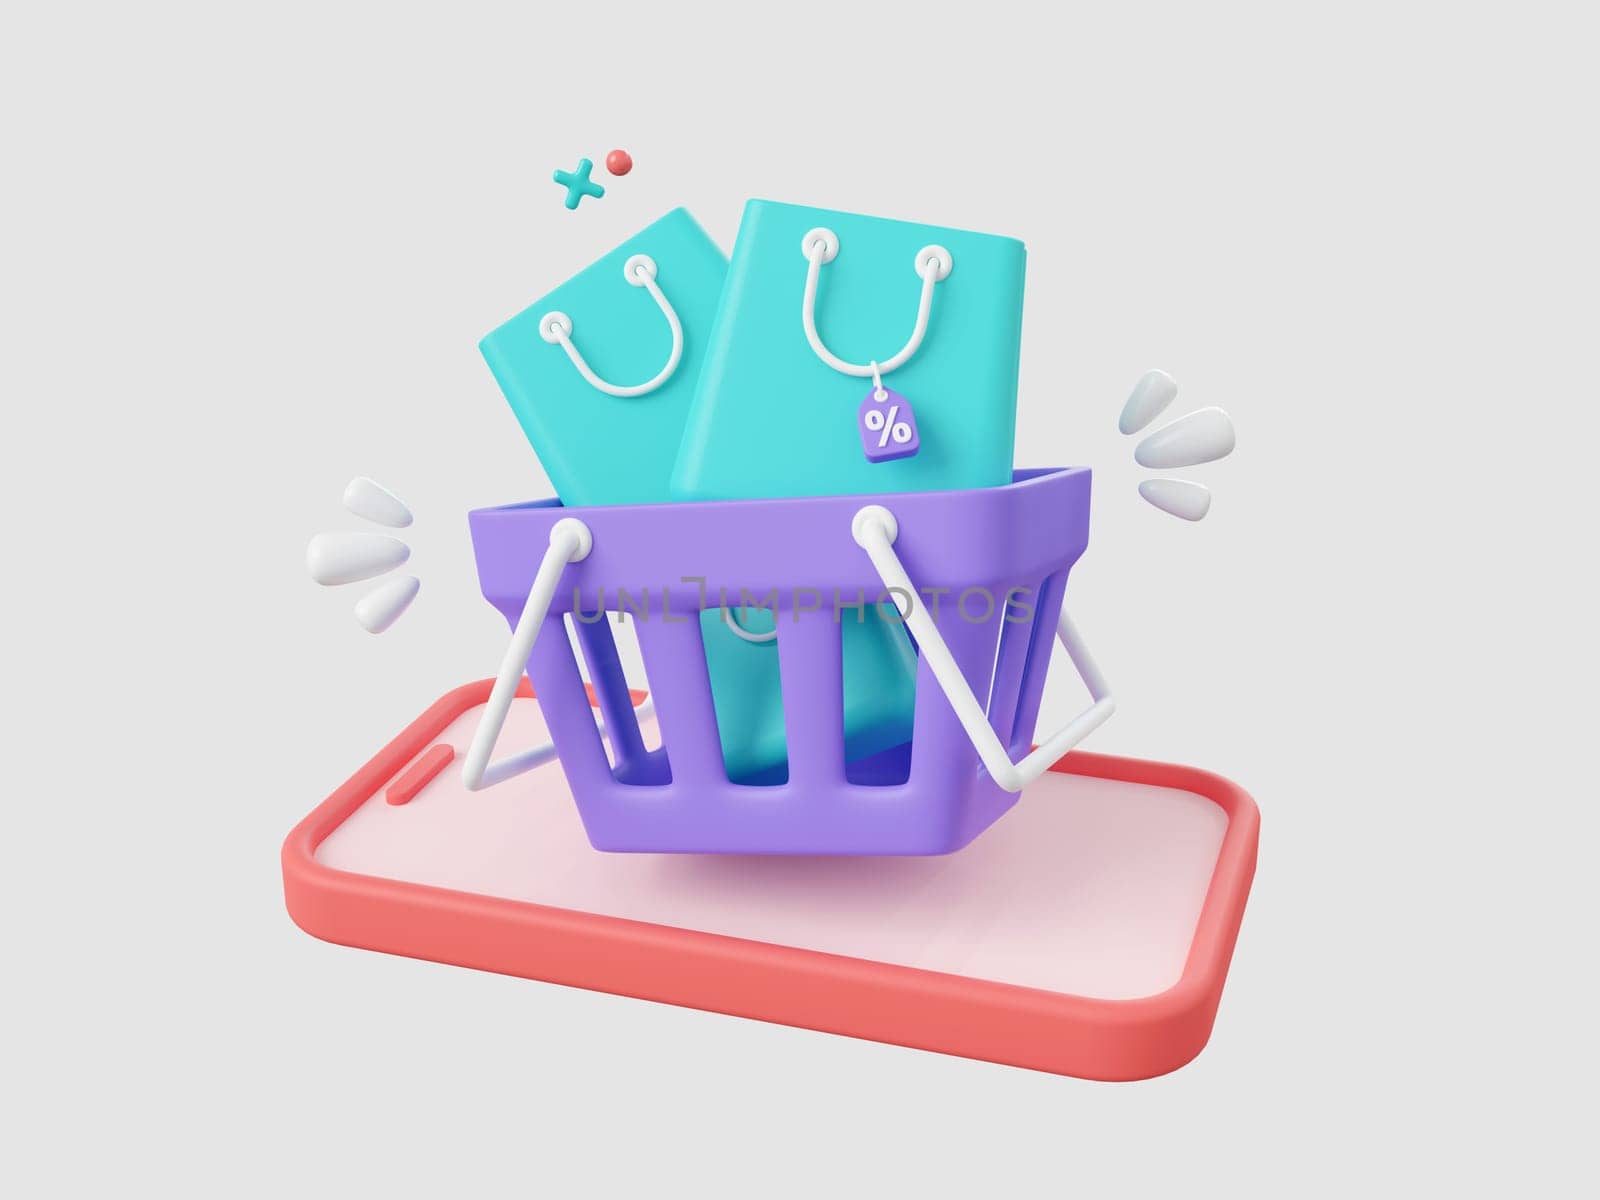 3d cartoon design illustration of Shop smartphone and shopping cart, shopping bags with discount tag, Shopping online on mobile concept.